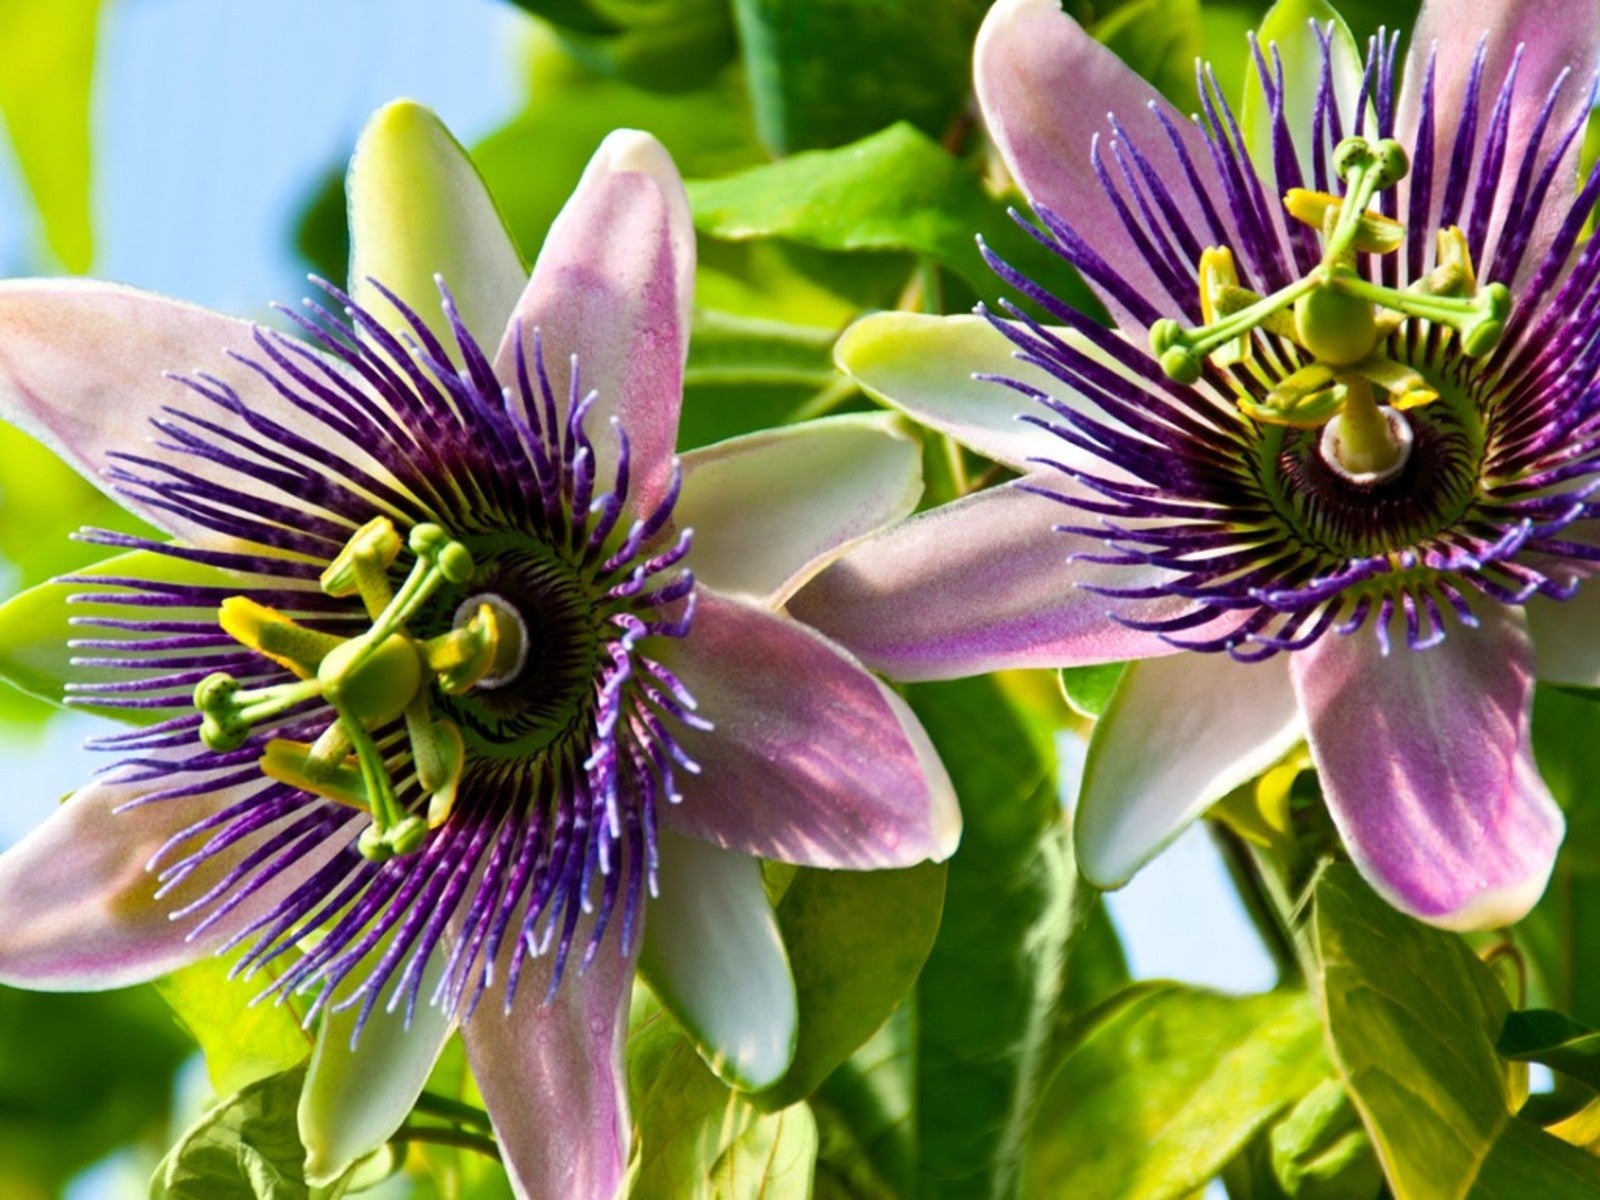 Passion Flower Care: Tips For Growing Passion Flowers